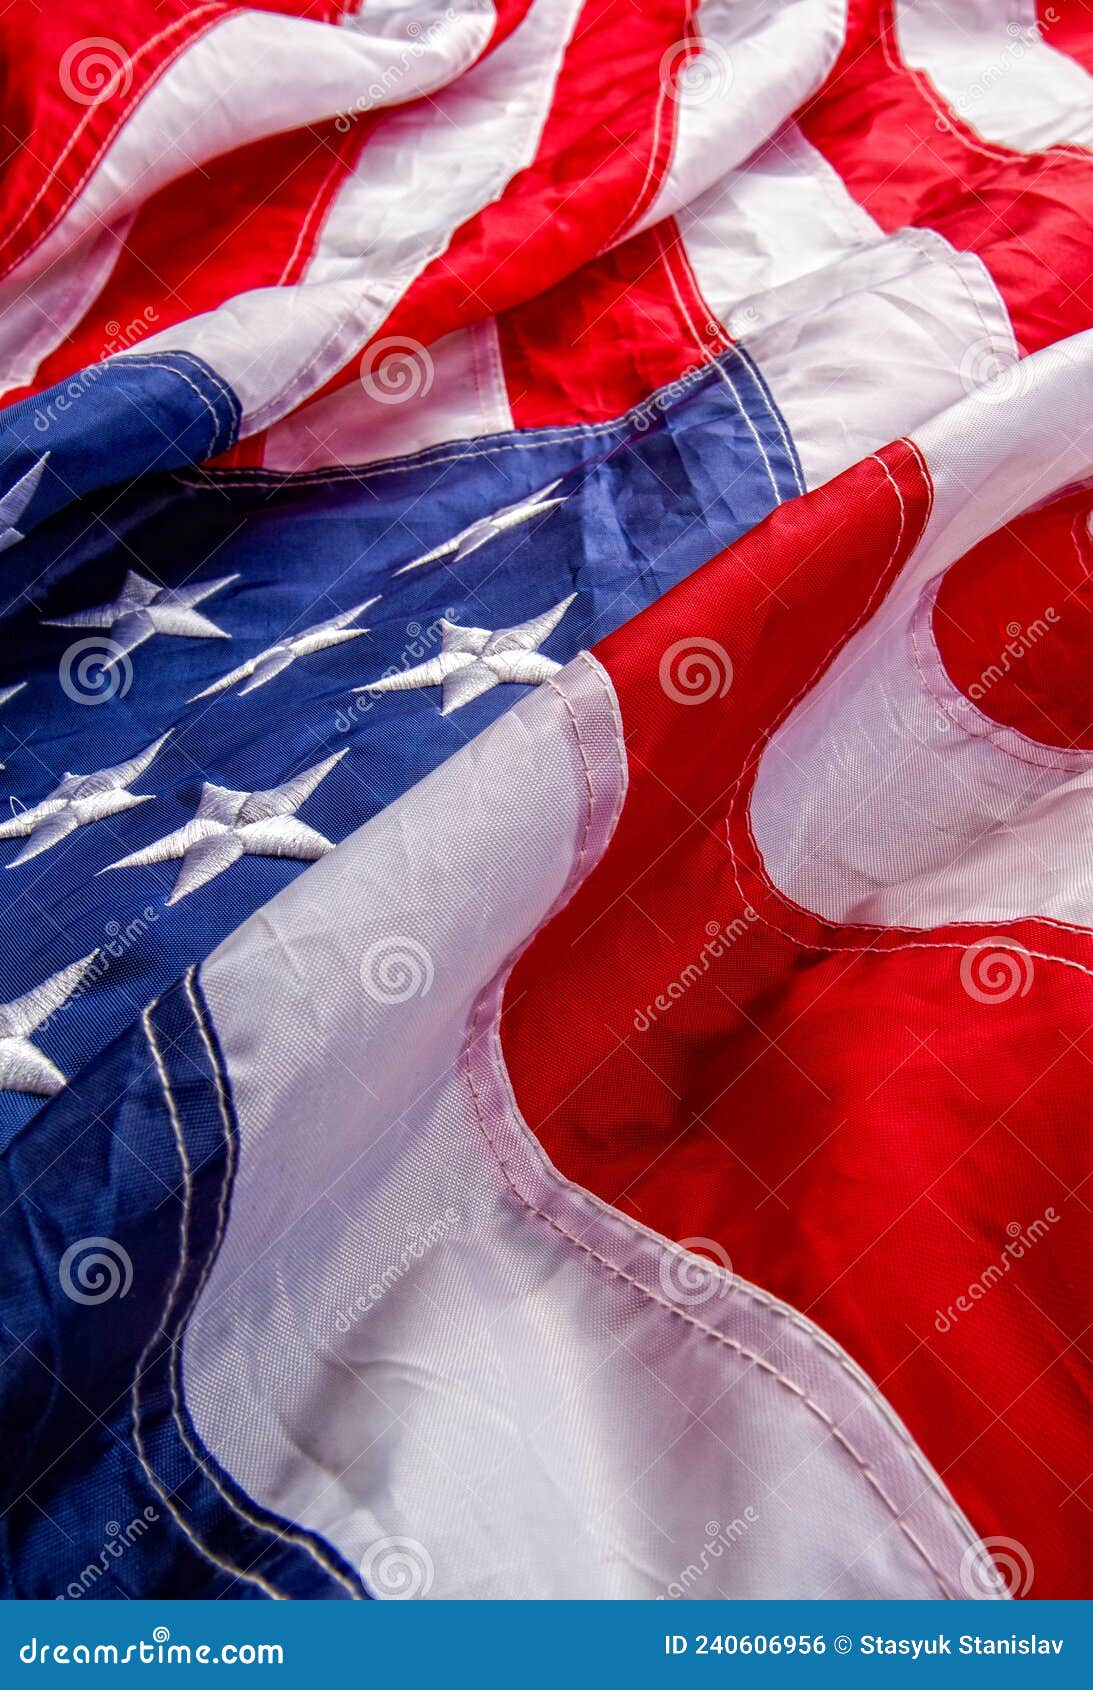 Beautiful Star Striped Flag Waving The State Symbol The United States